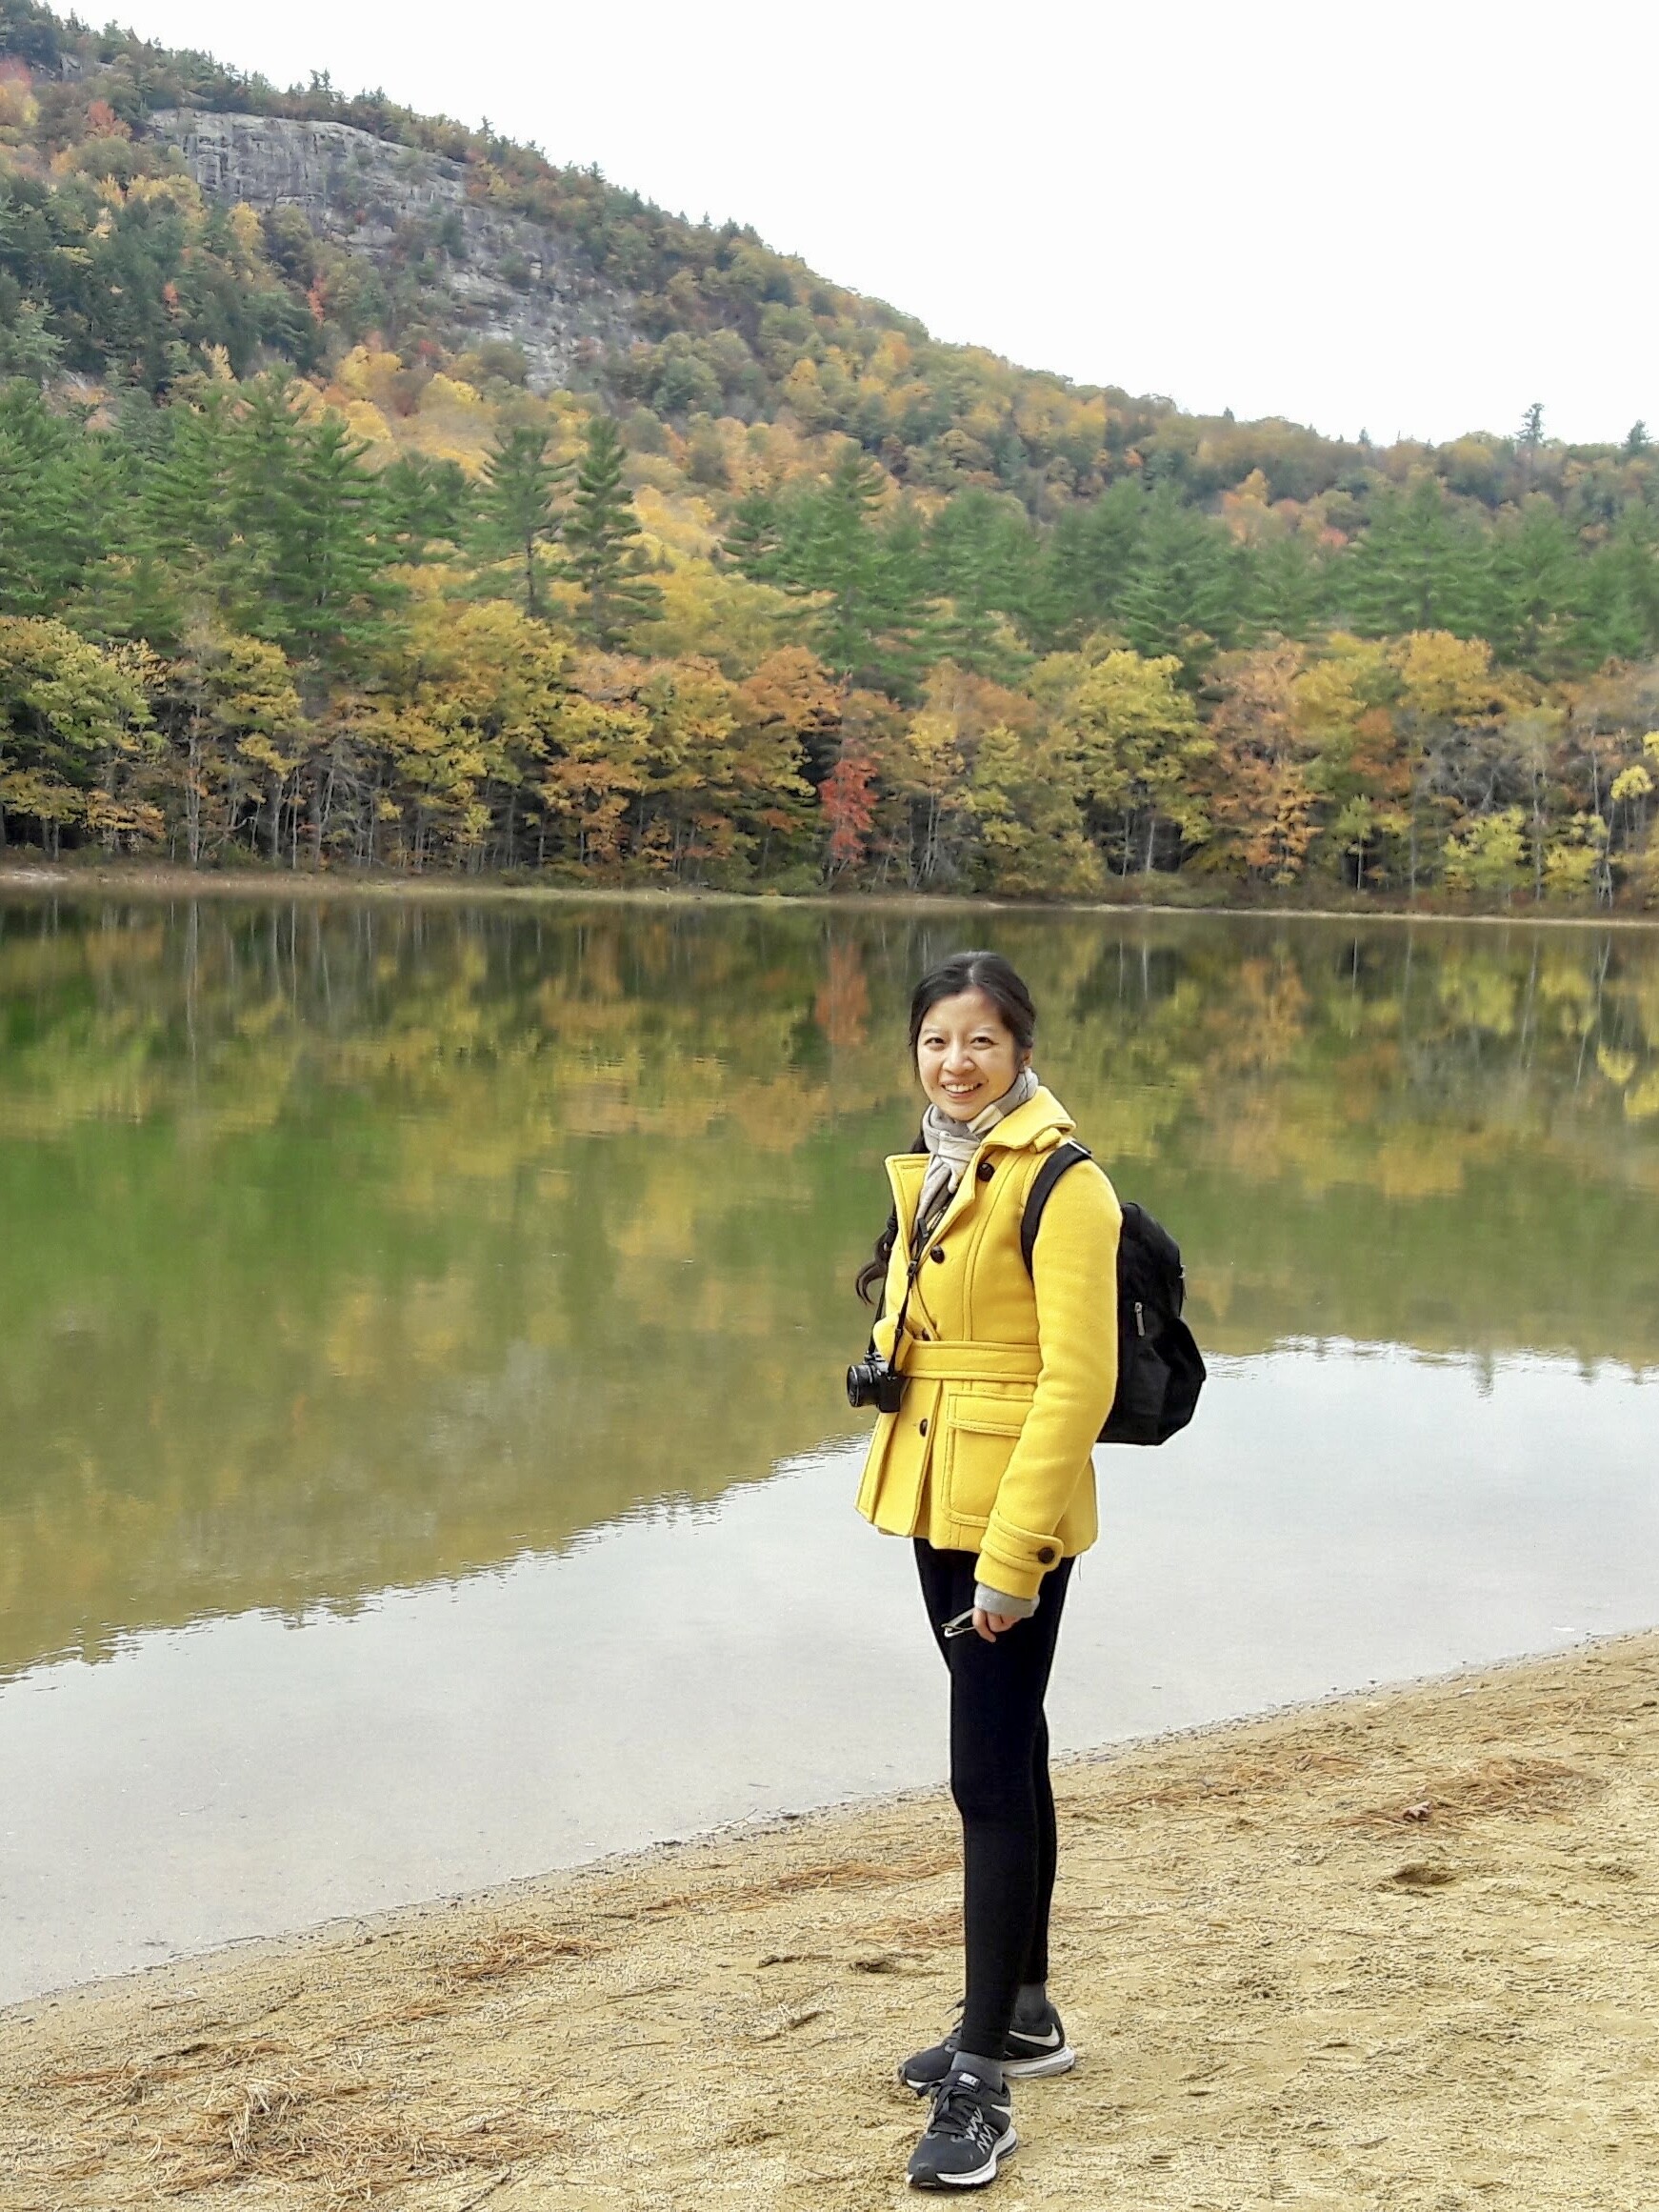 Celestine Hong poses beside a scenic lake with trees in the background.